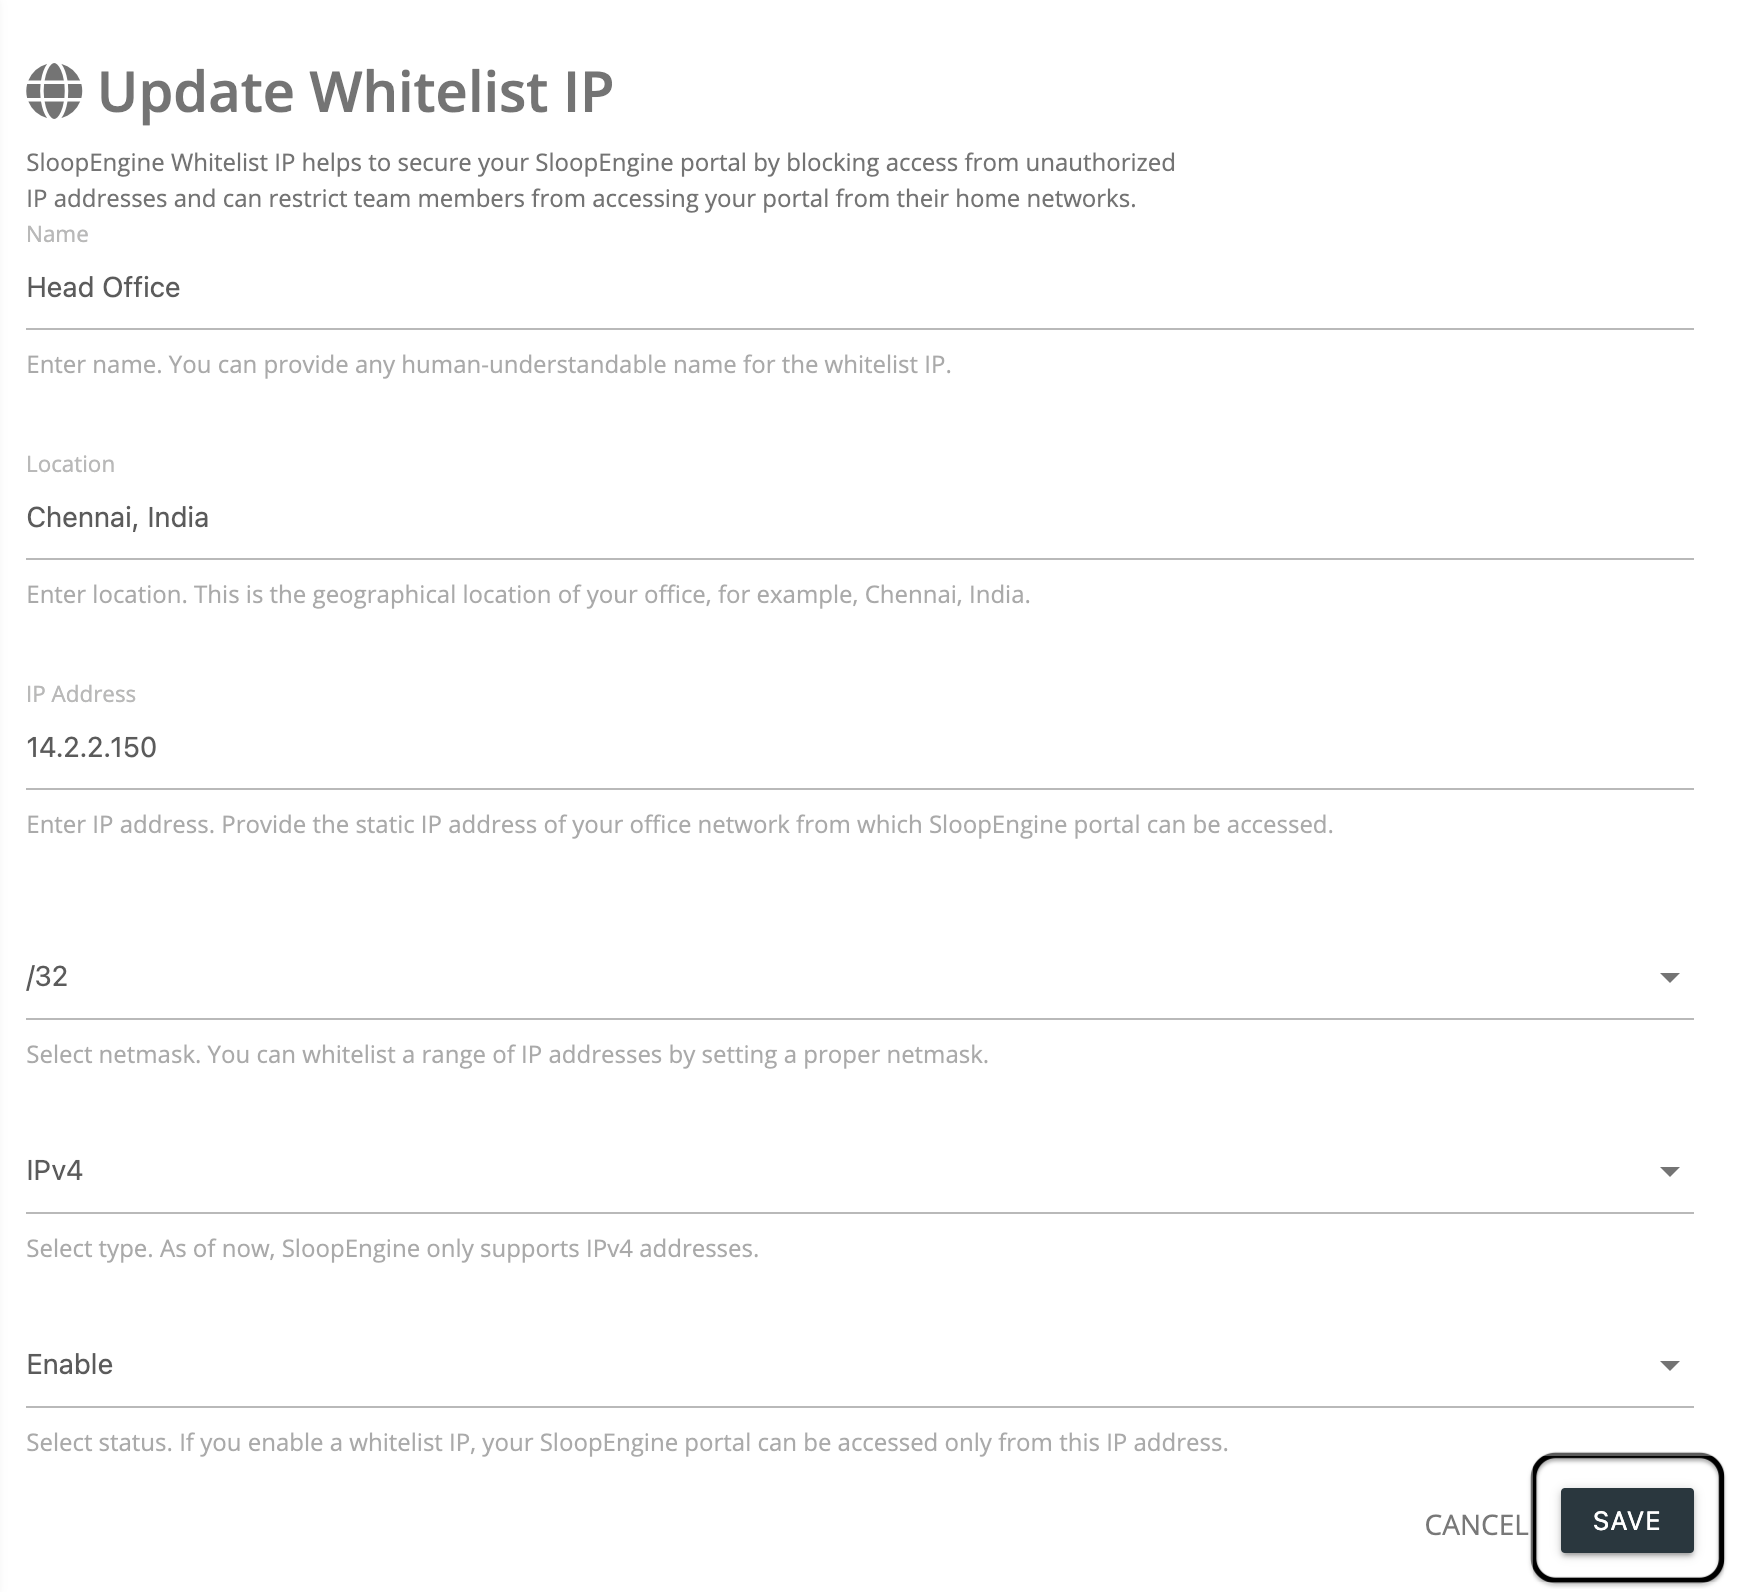 Screenshot of the Whitelist IP updation form with valid information.